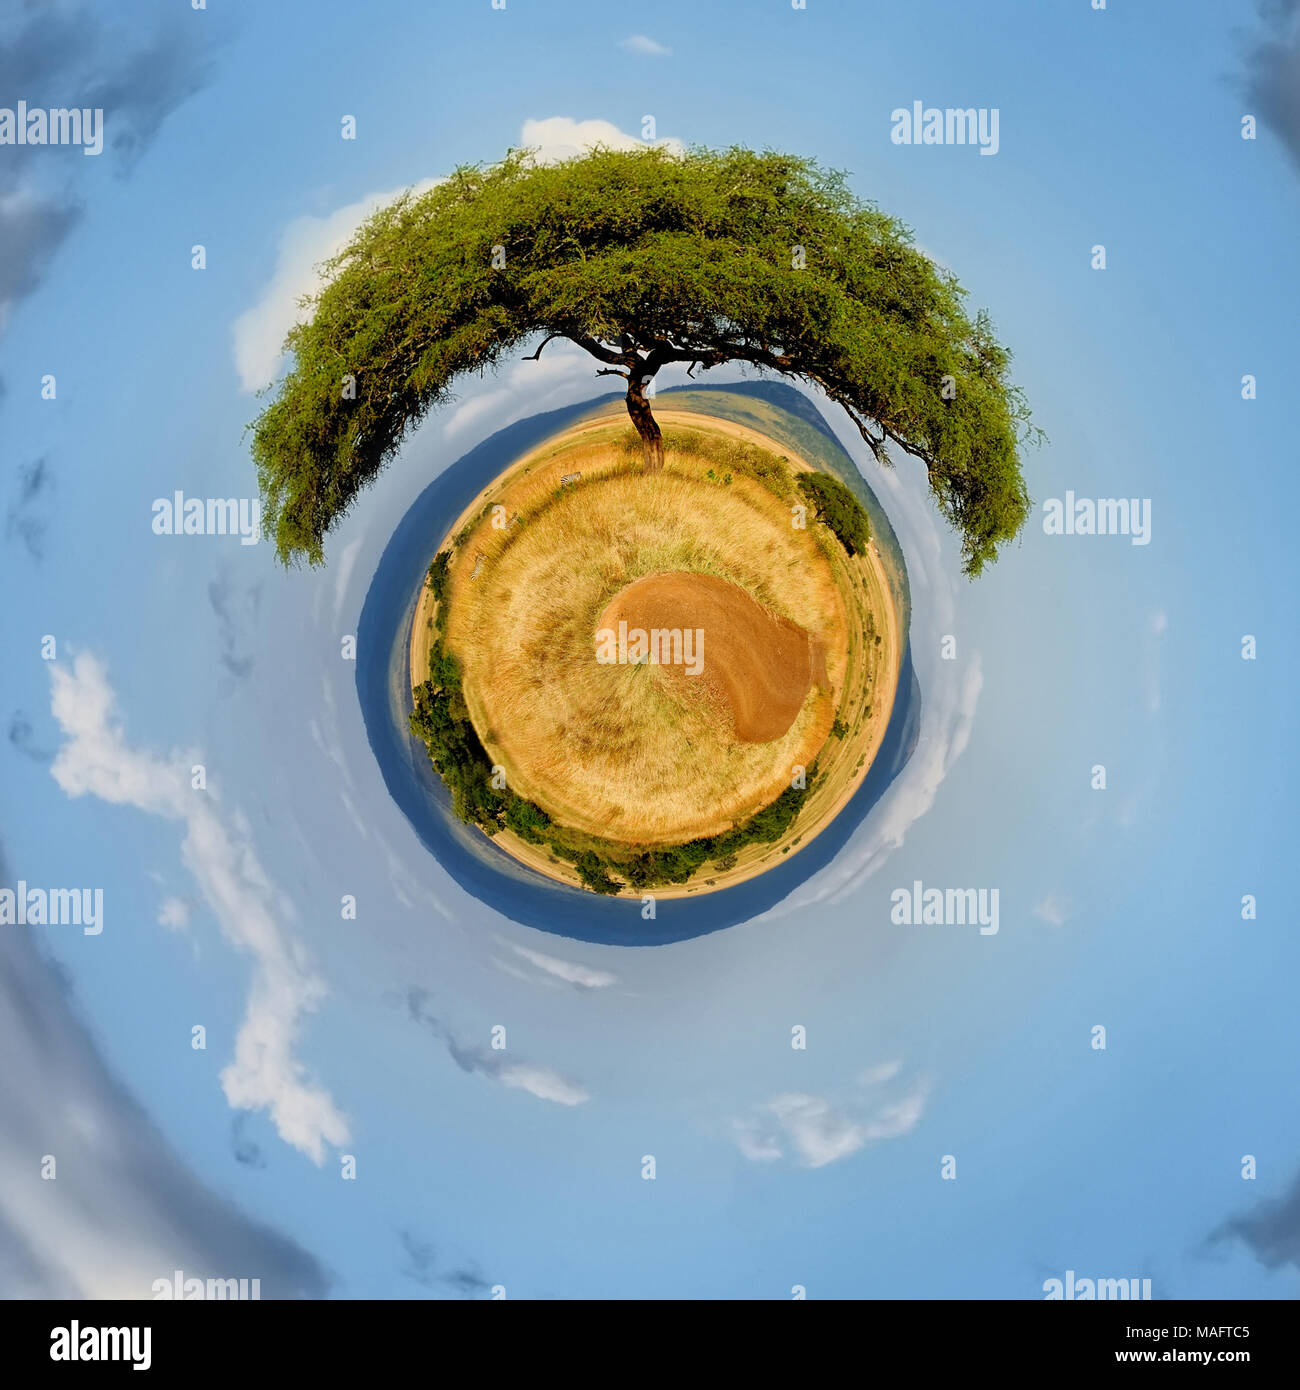 360 degree view of Beautiful landscape with tree in Africa Stock Photo